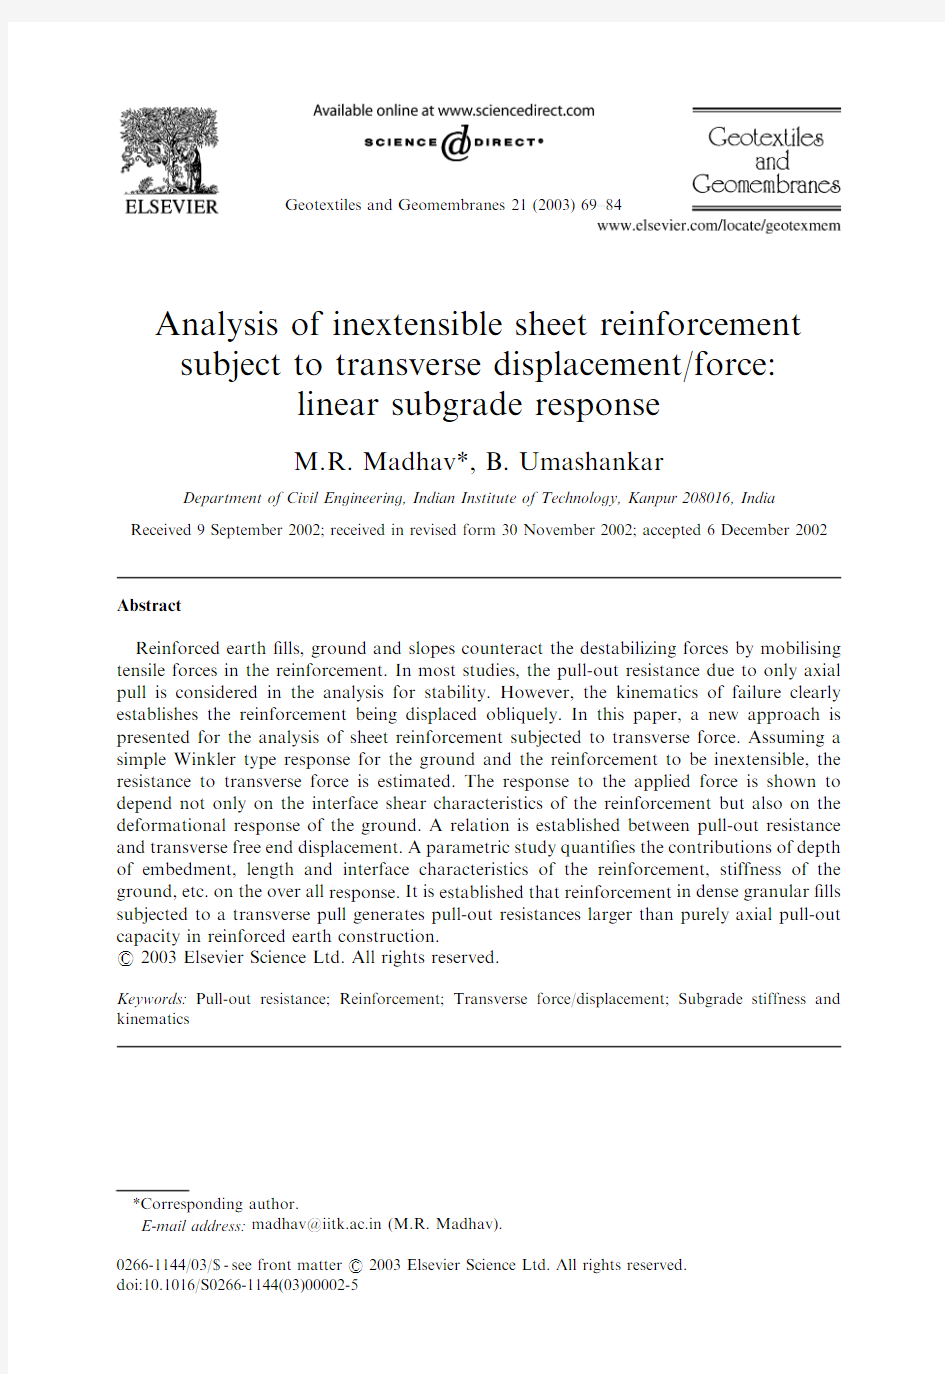 Analysis of inextensible sheet reinforcement subject to transverse displacement force linear subg